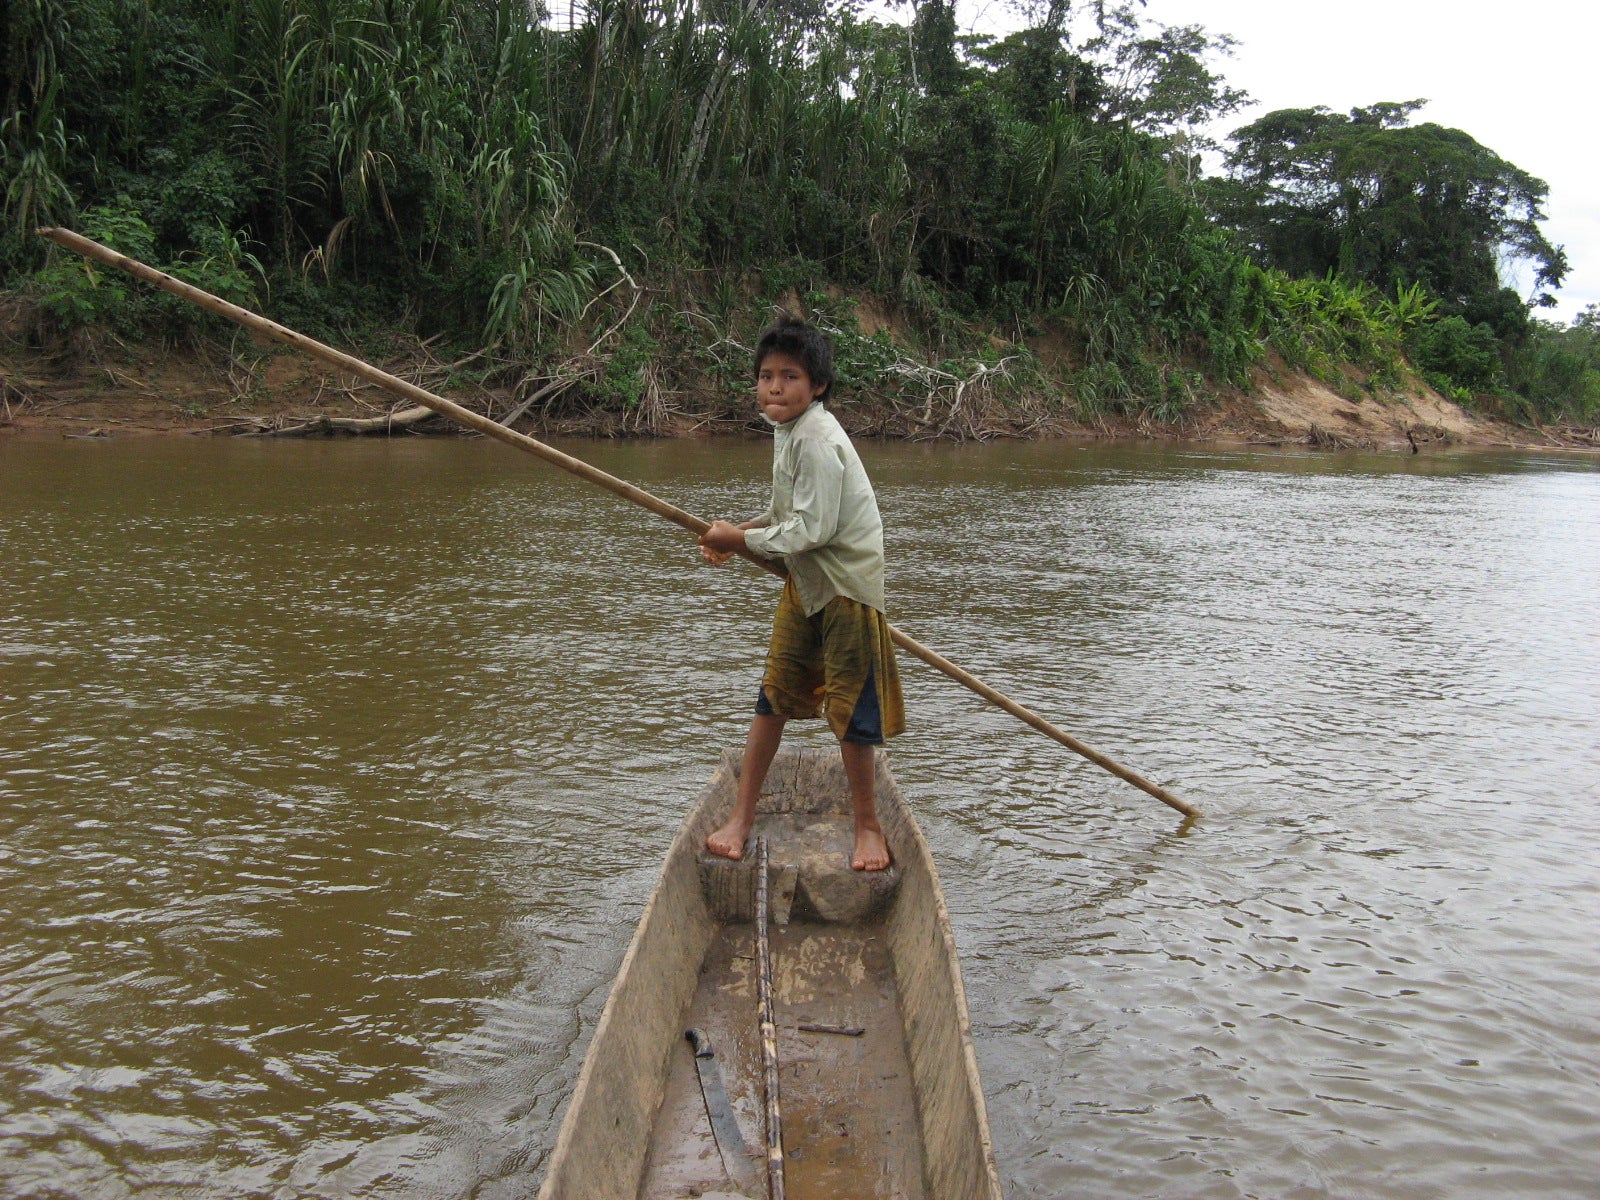 Bolivia’s Tsimane people have highly active lifestyles